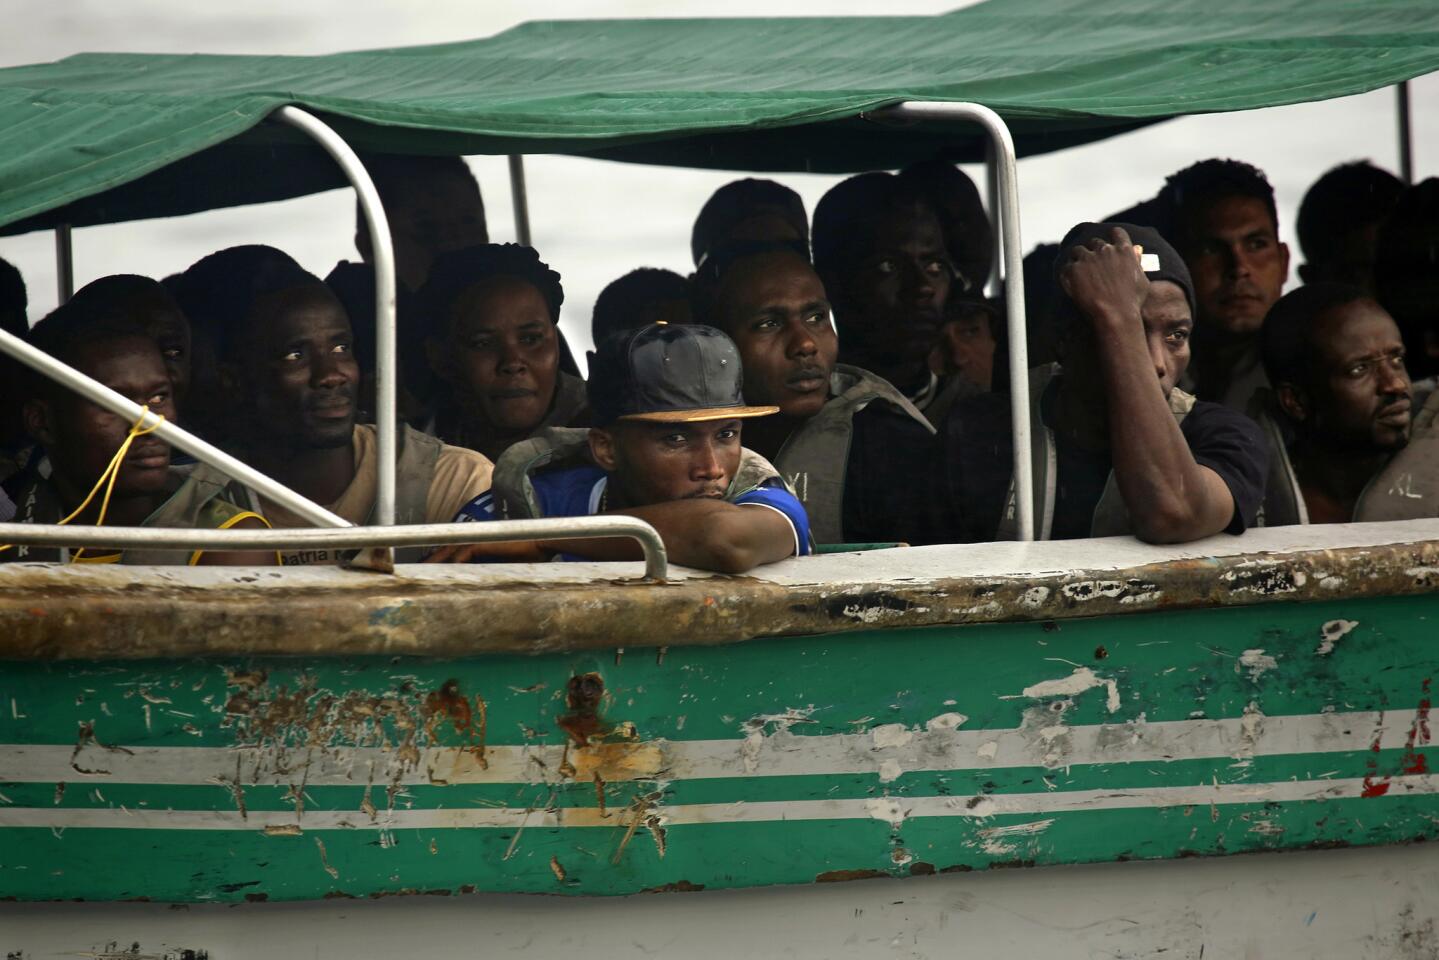 Every day hundreds of migrants from Cuba, Haiti and parts of Asia and Africa are attempting to cross the border from Colombia to Panama in the hopes of making it to the U.S.